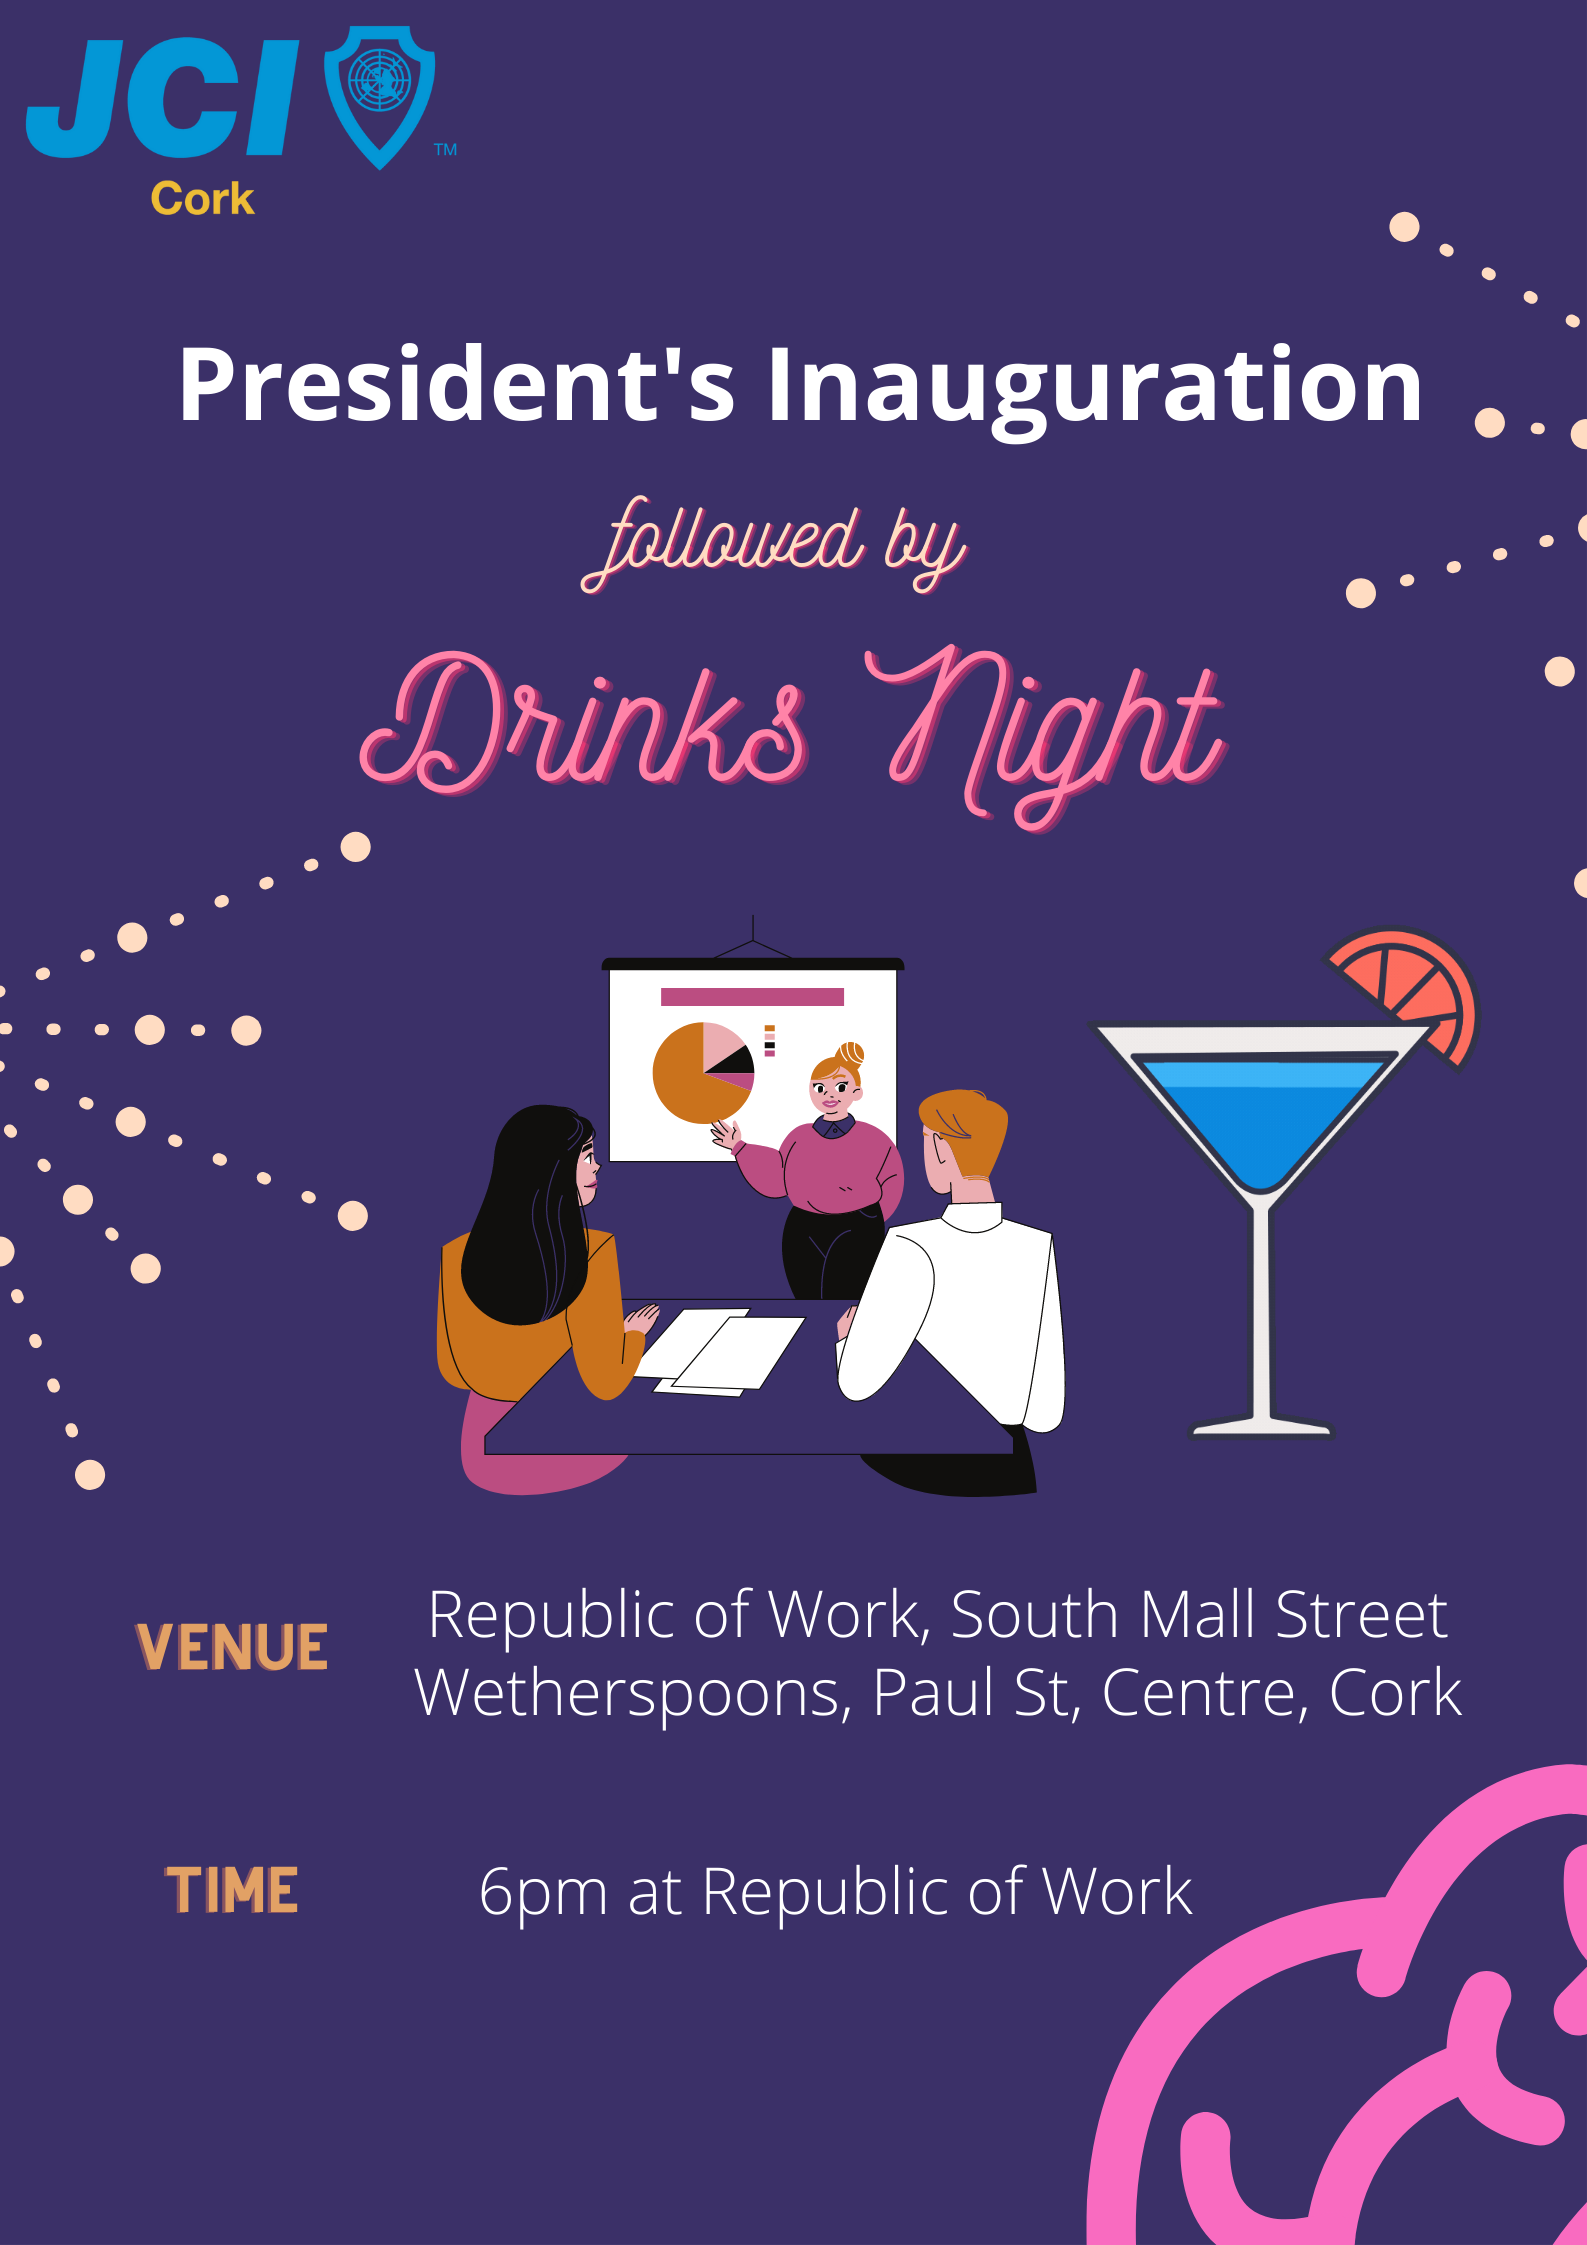 President's Inauguration and Social Evening